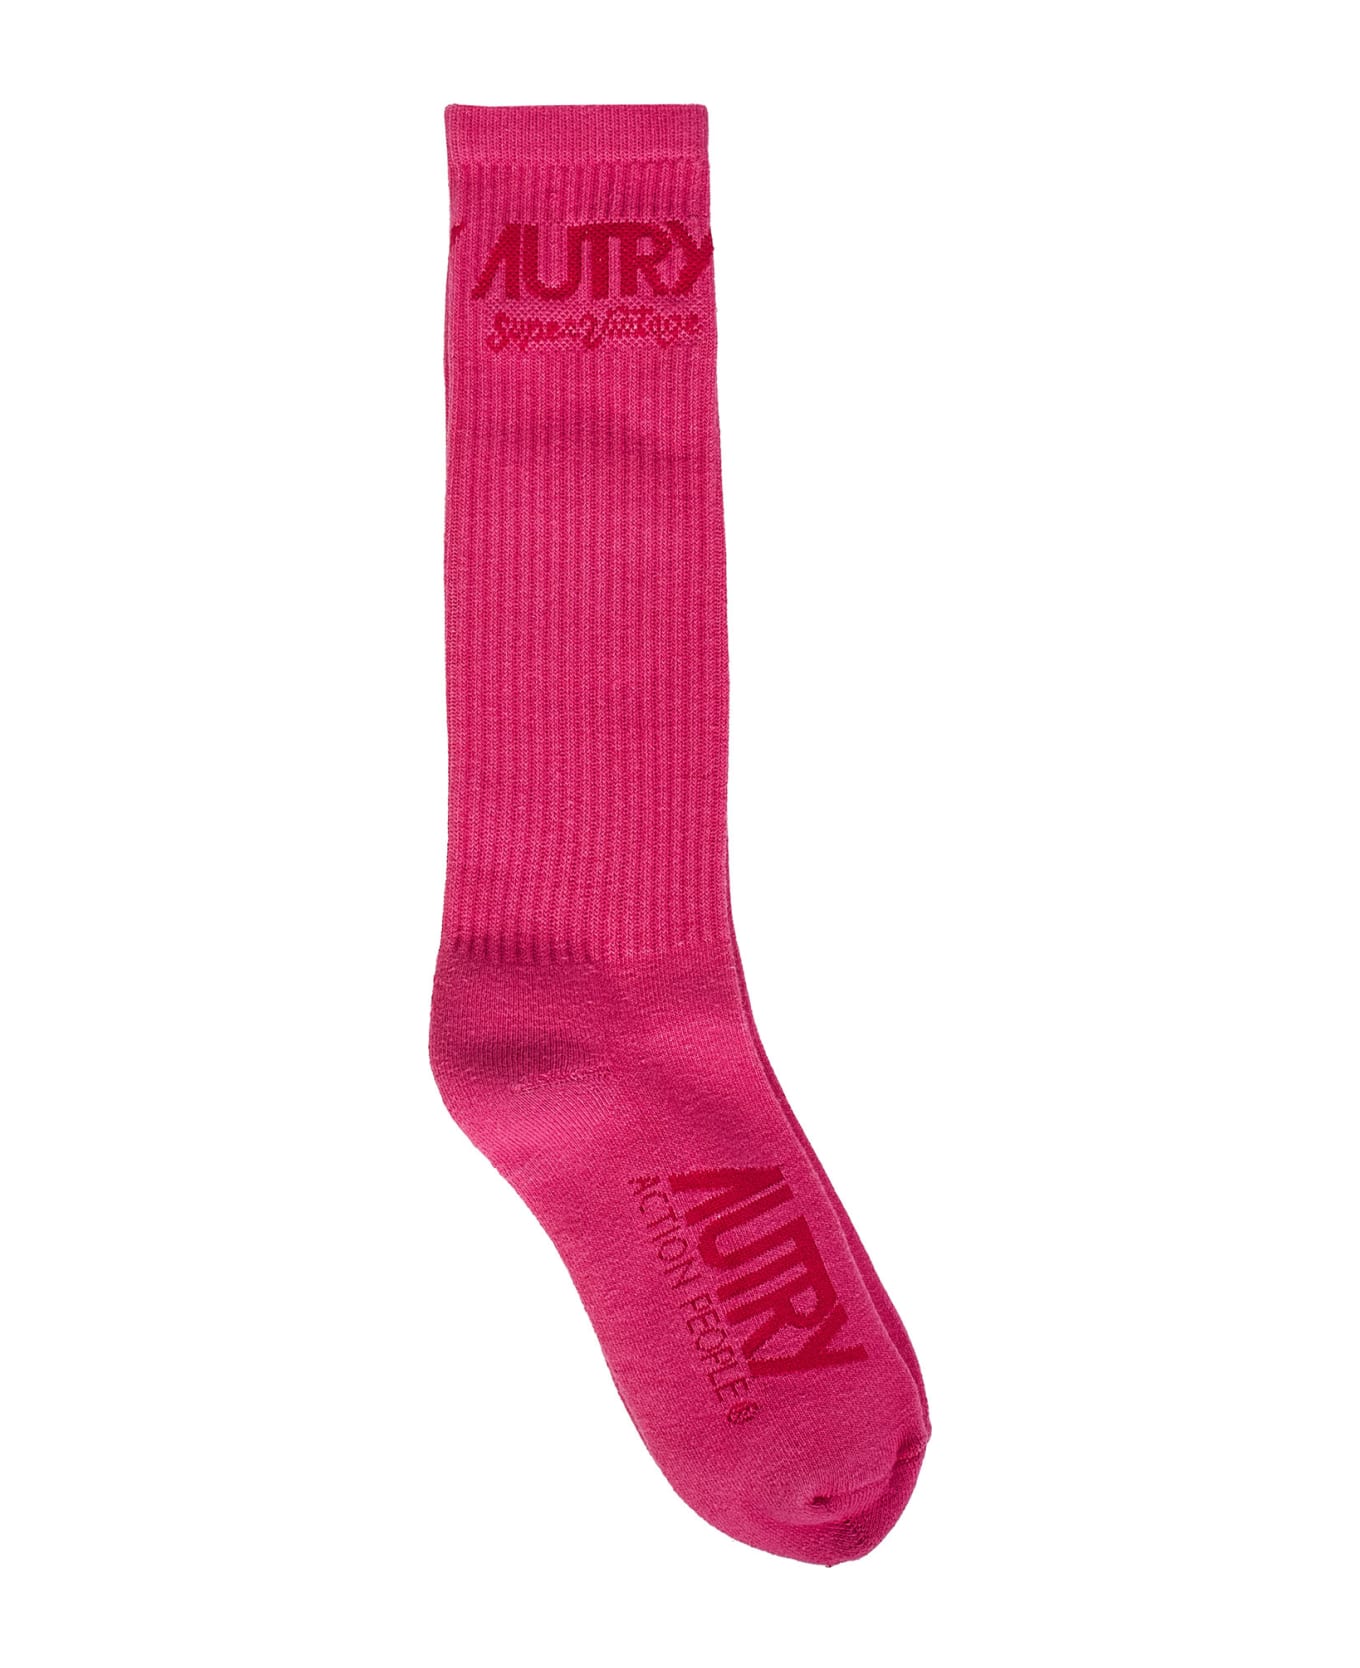 Autry Supervintage Socks - Fuxia 靴下